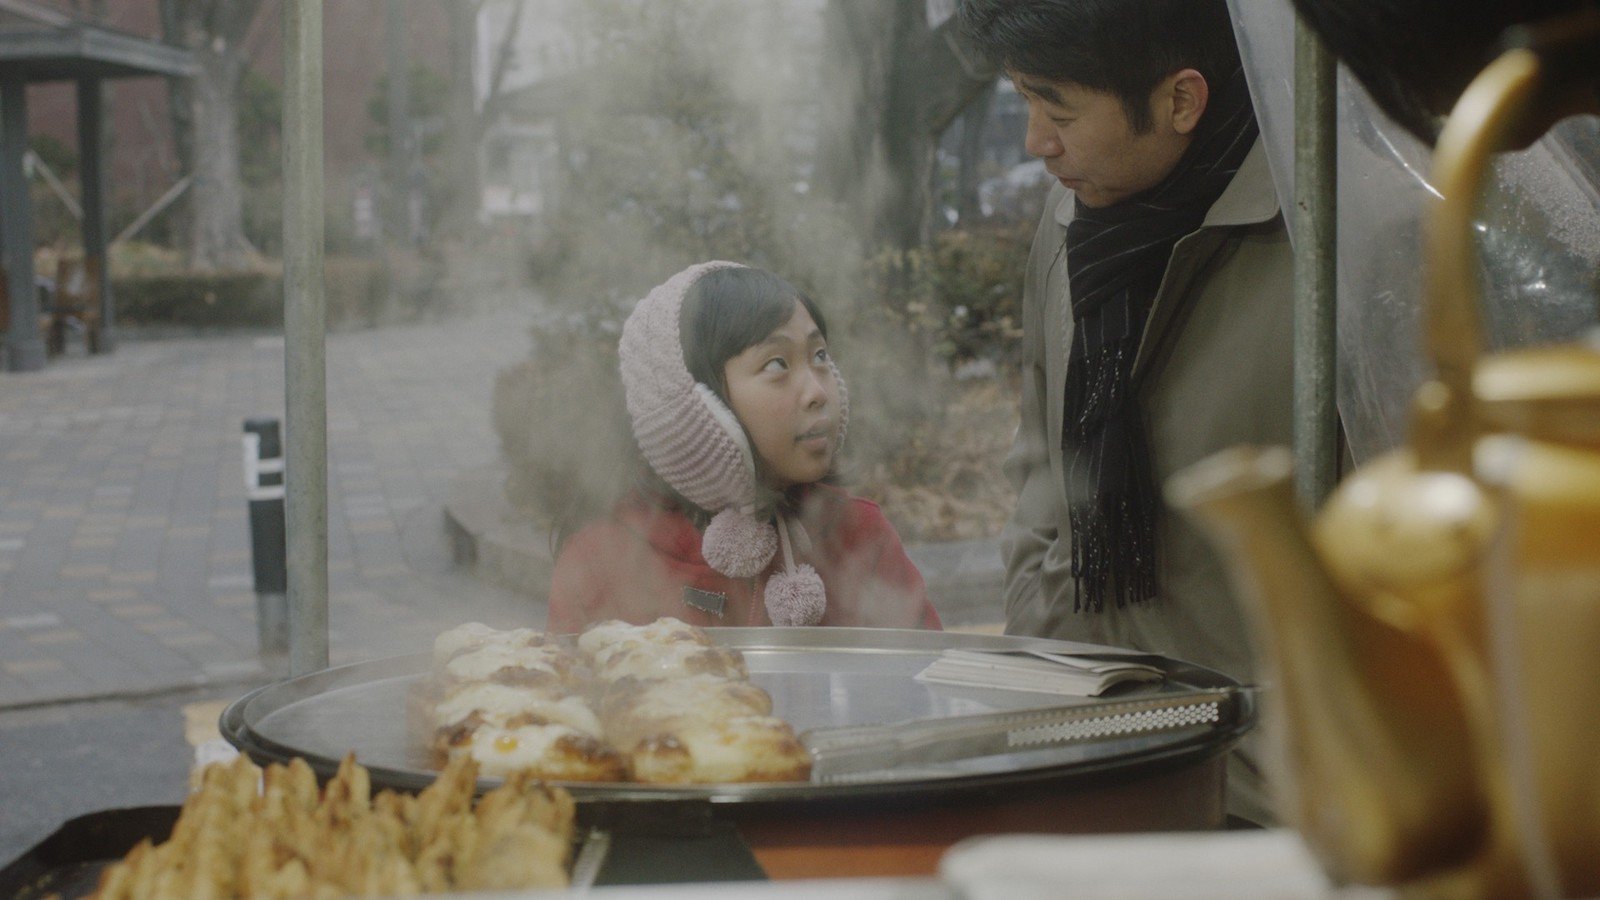 A little girl in a pink winter hat with pom poms looks up at an older man, maybe her father, while standing in front of a food cart with a tray of pastries on it